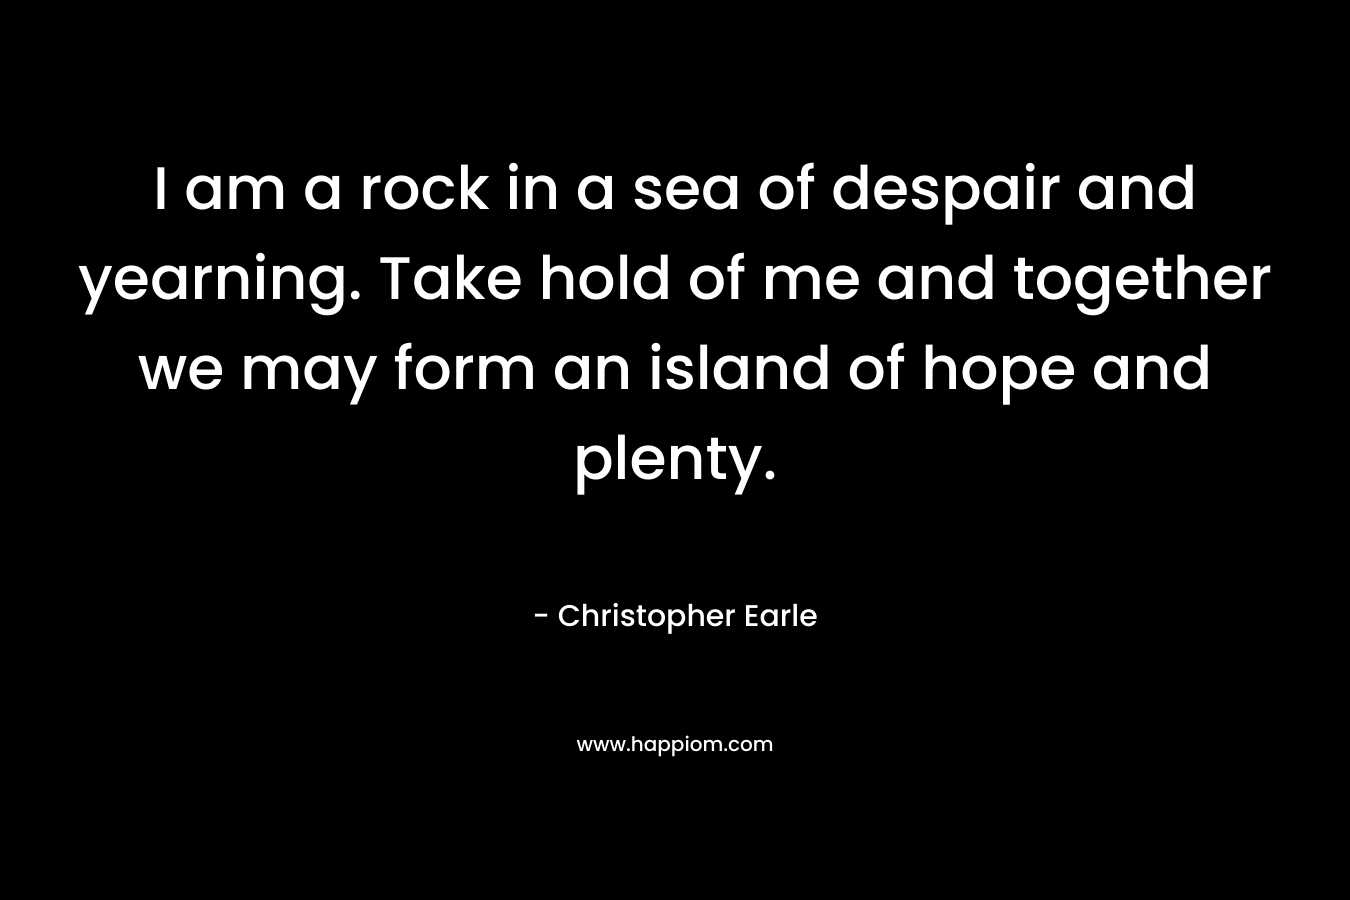 I am a rock in a sea of despair and yearning. Take hold of me and together we may form an island of hope and plenty. – Christopher Earle